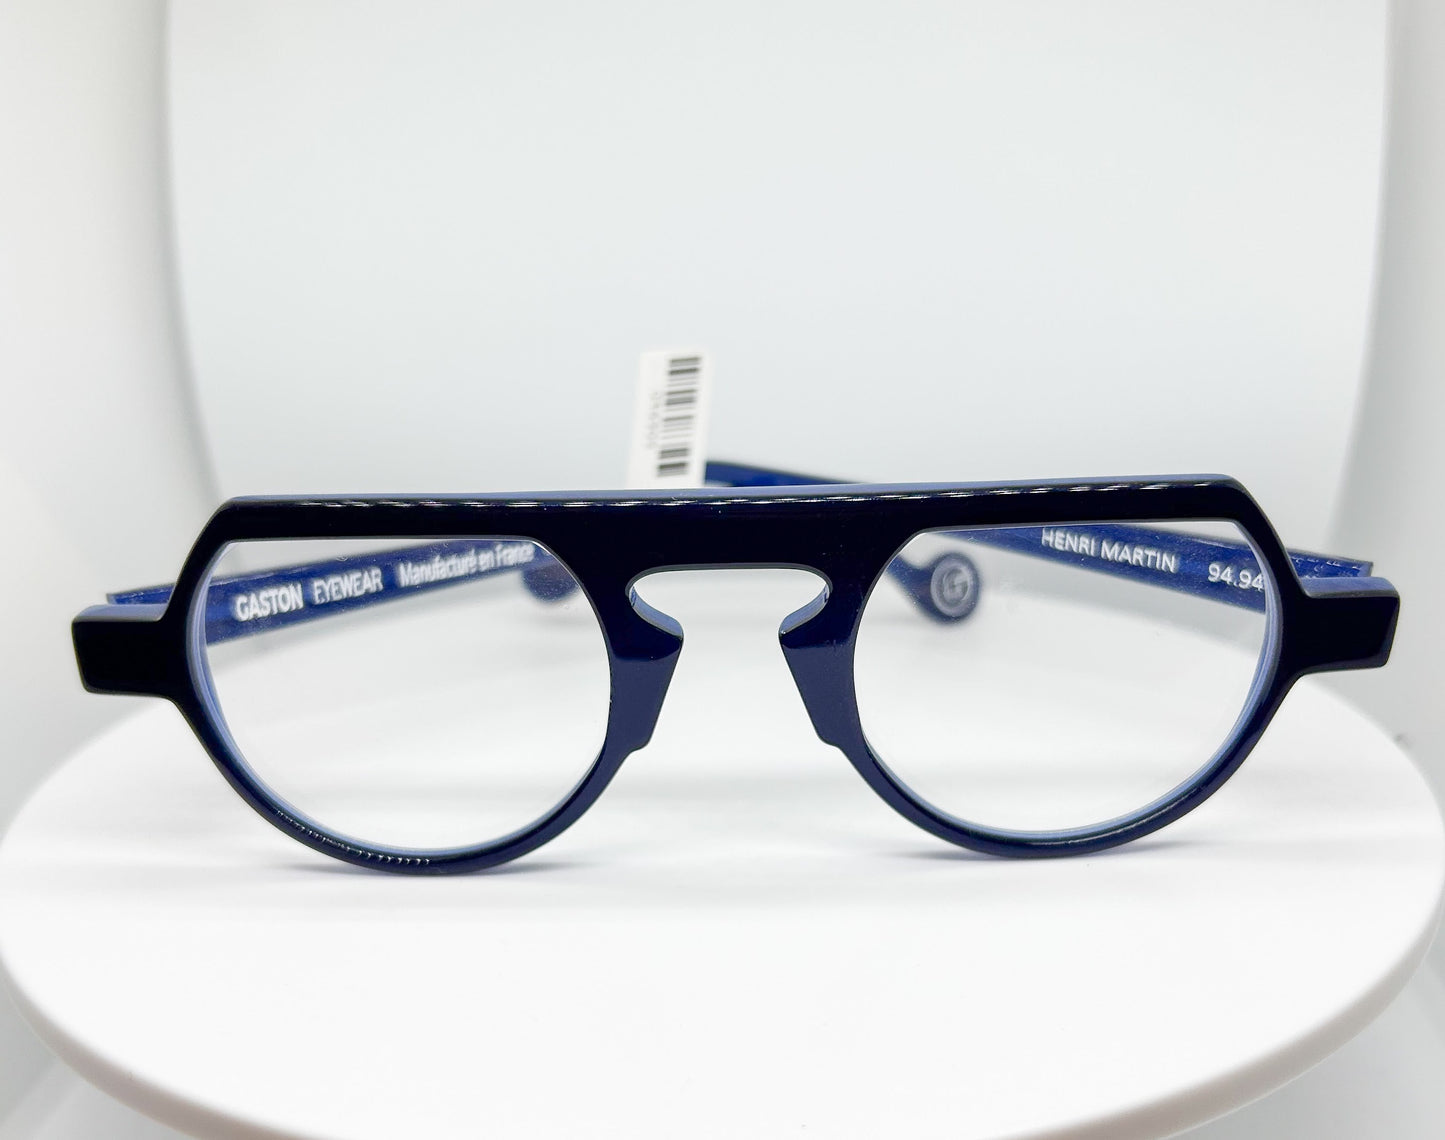 Buy Gaston Eyewear - Henri Martin, a  Navy; Acetate Optical Frame with a Round with Flat Top shape. An Authorized Dealer, Adair Eyewear has a 40+ Years History of Customer Service Excellence